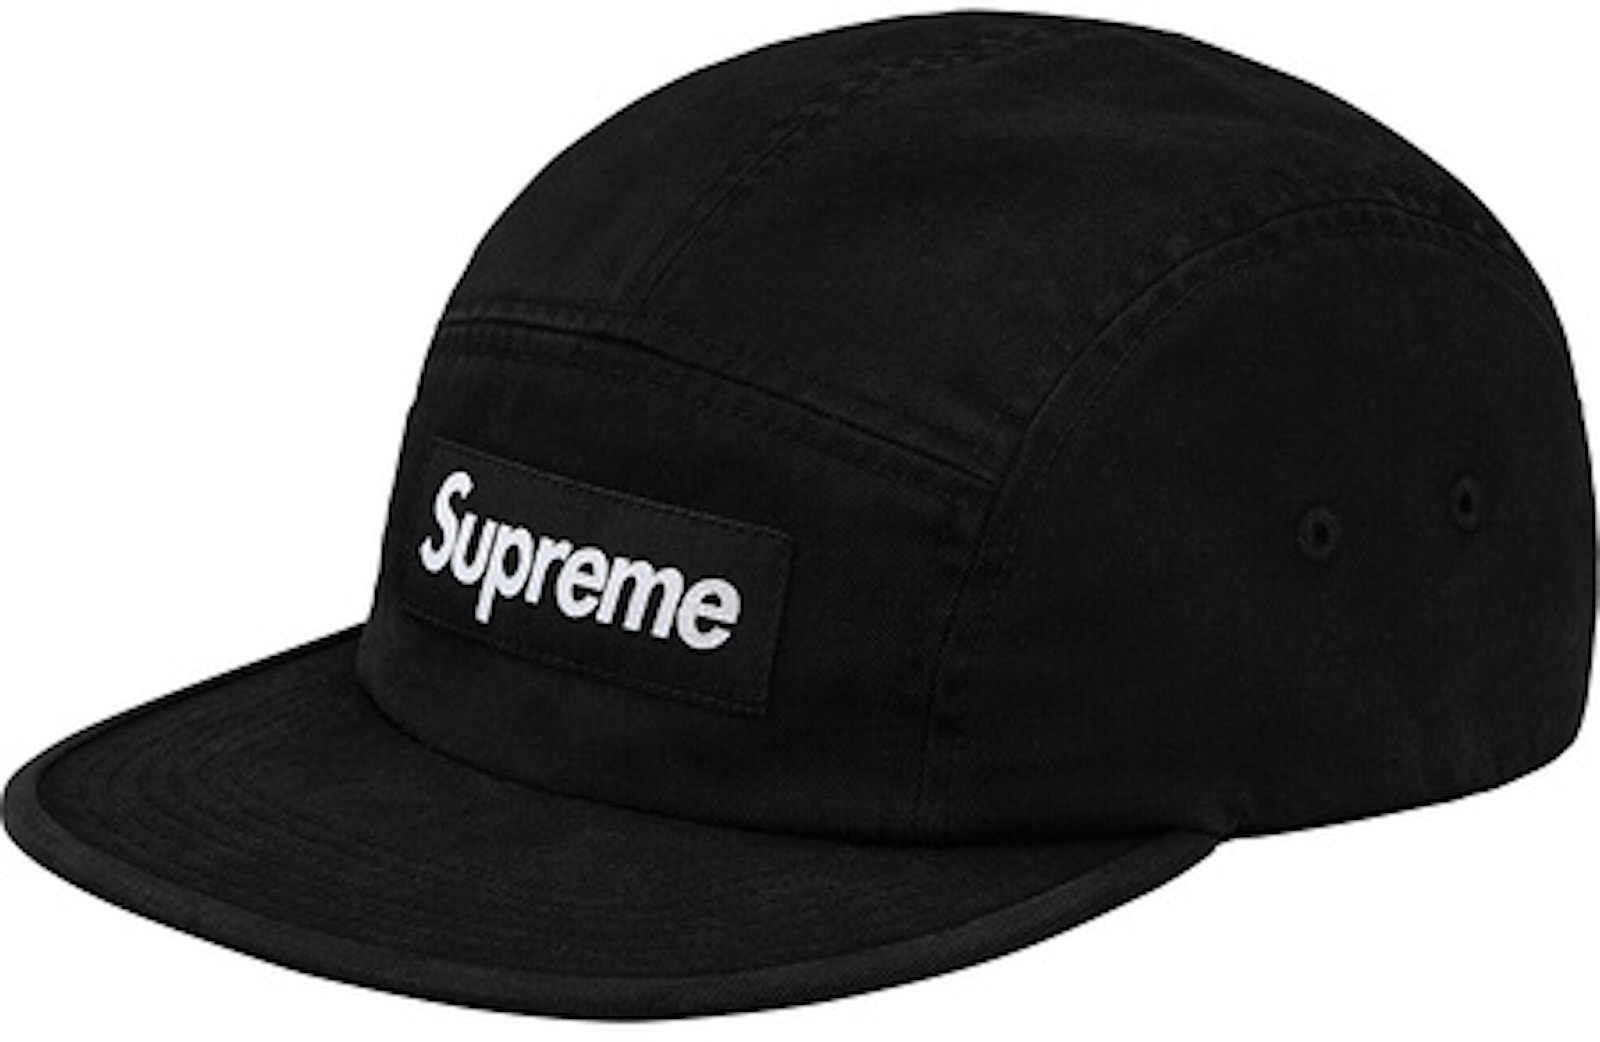 Supreme Washed Chino Twill Camp Cap (SS18) Black - SS18